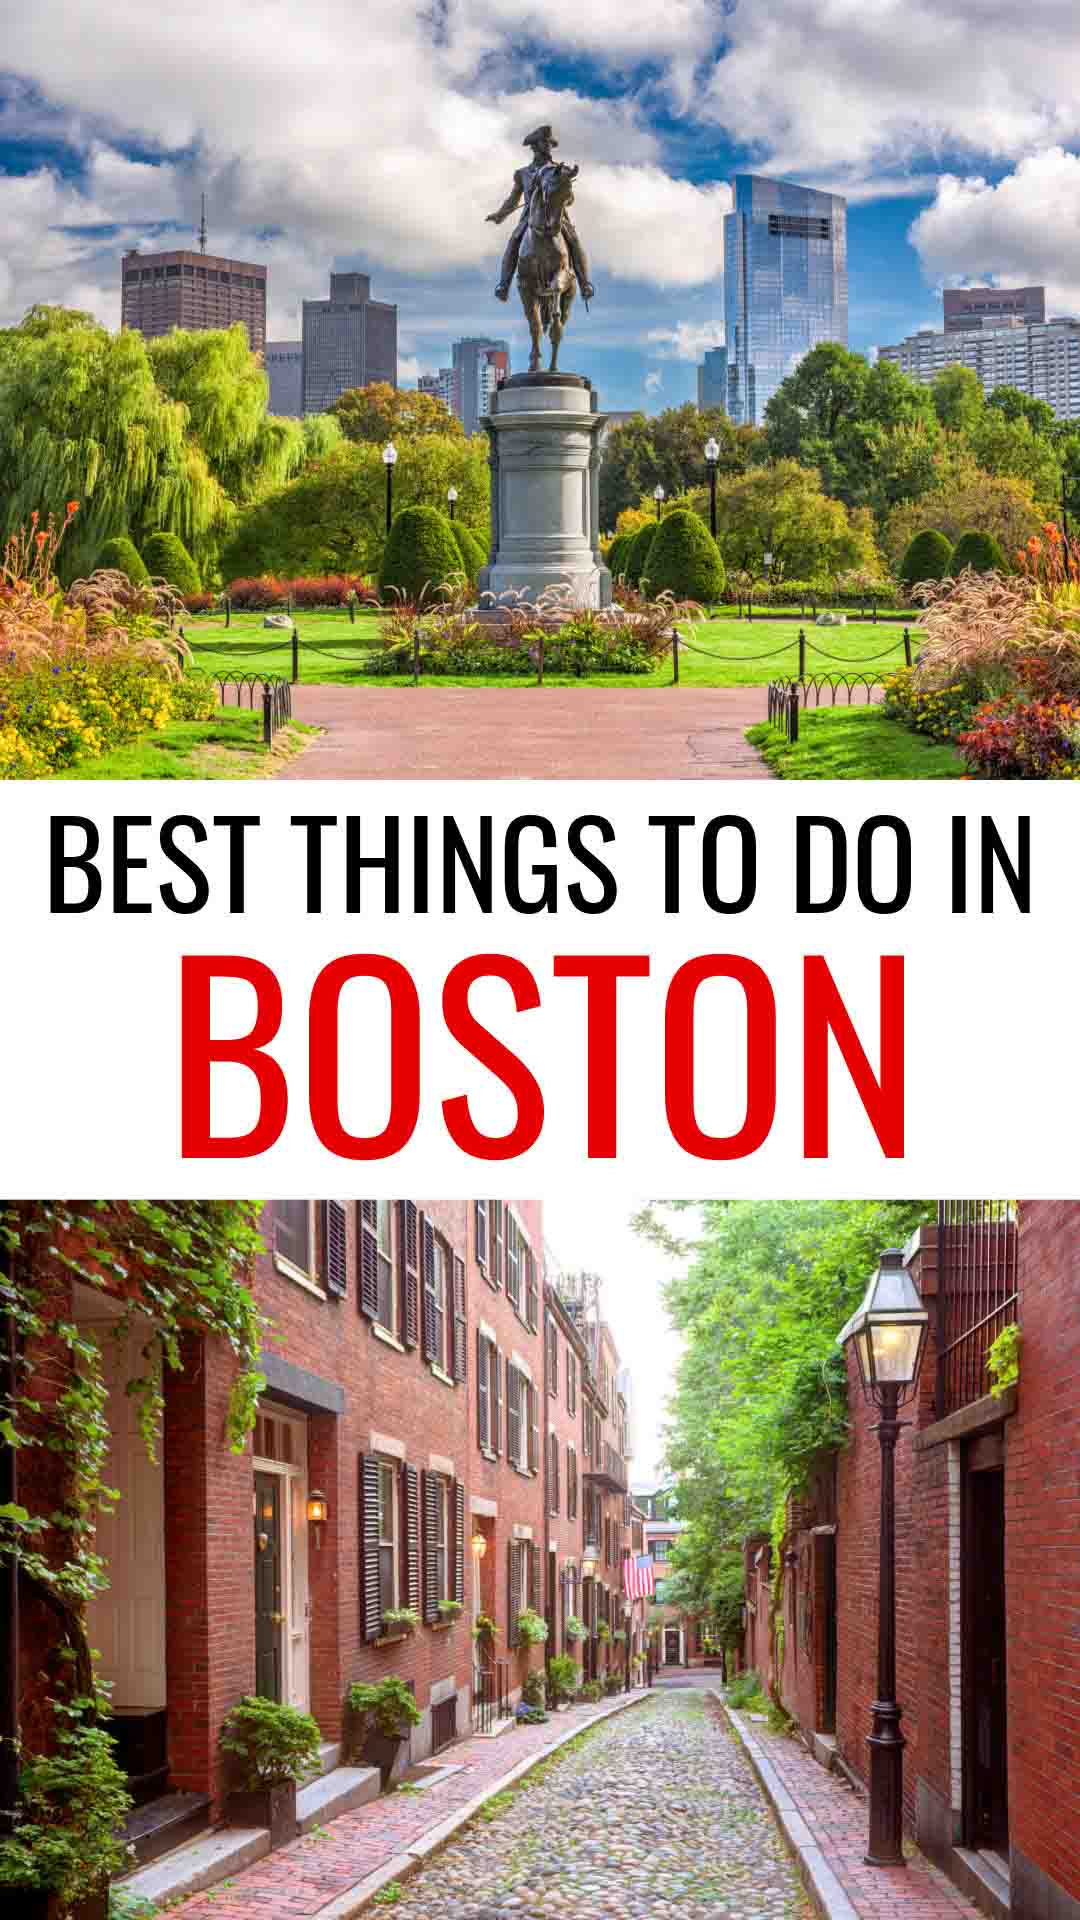 Best things to do in Boston collage with photos of Boston Public Garden and Acorn Street